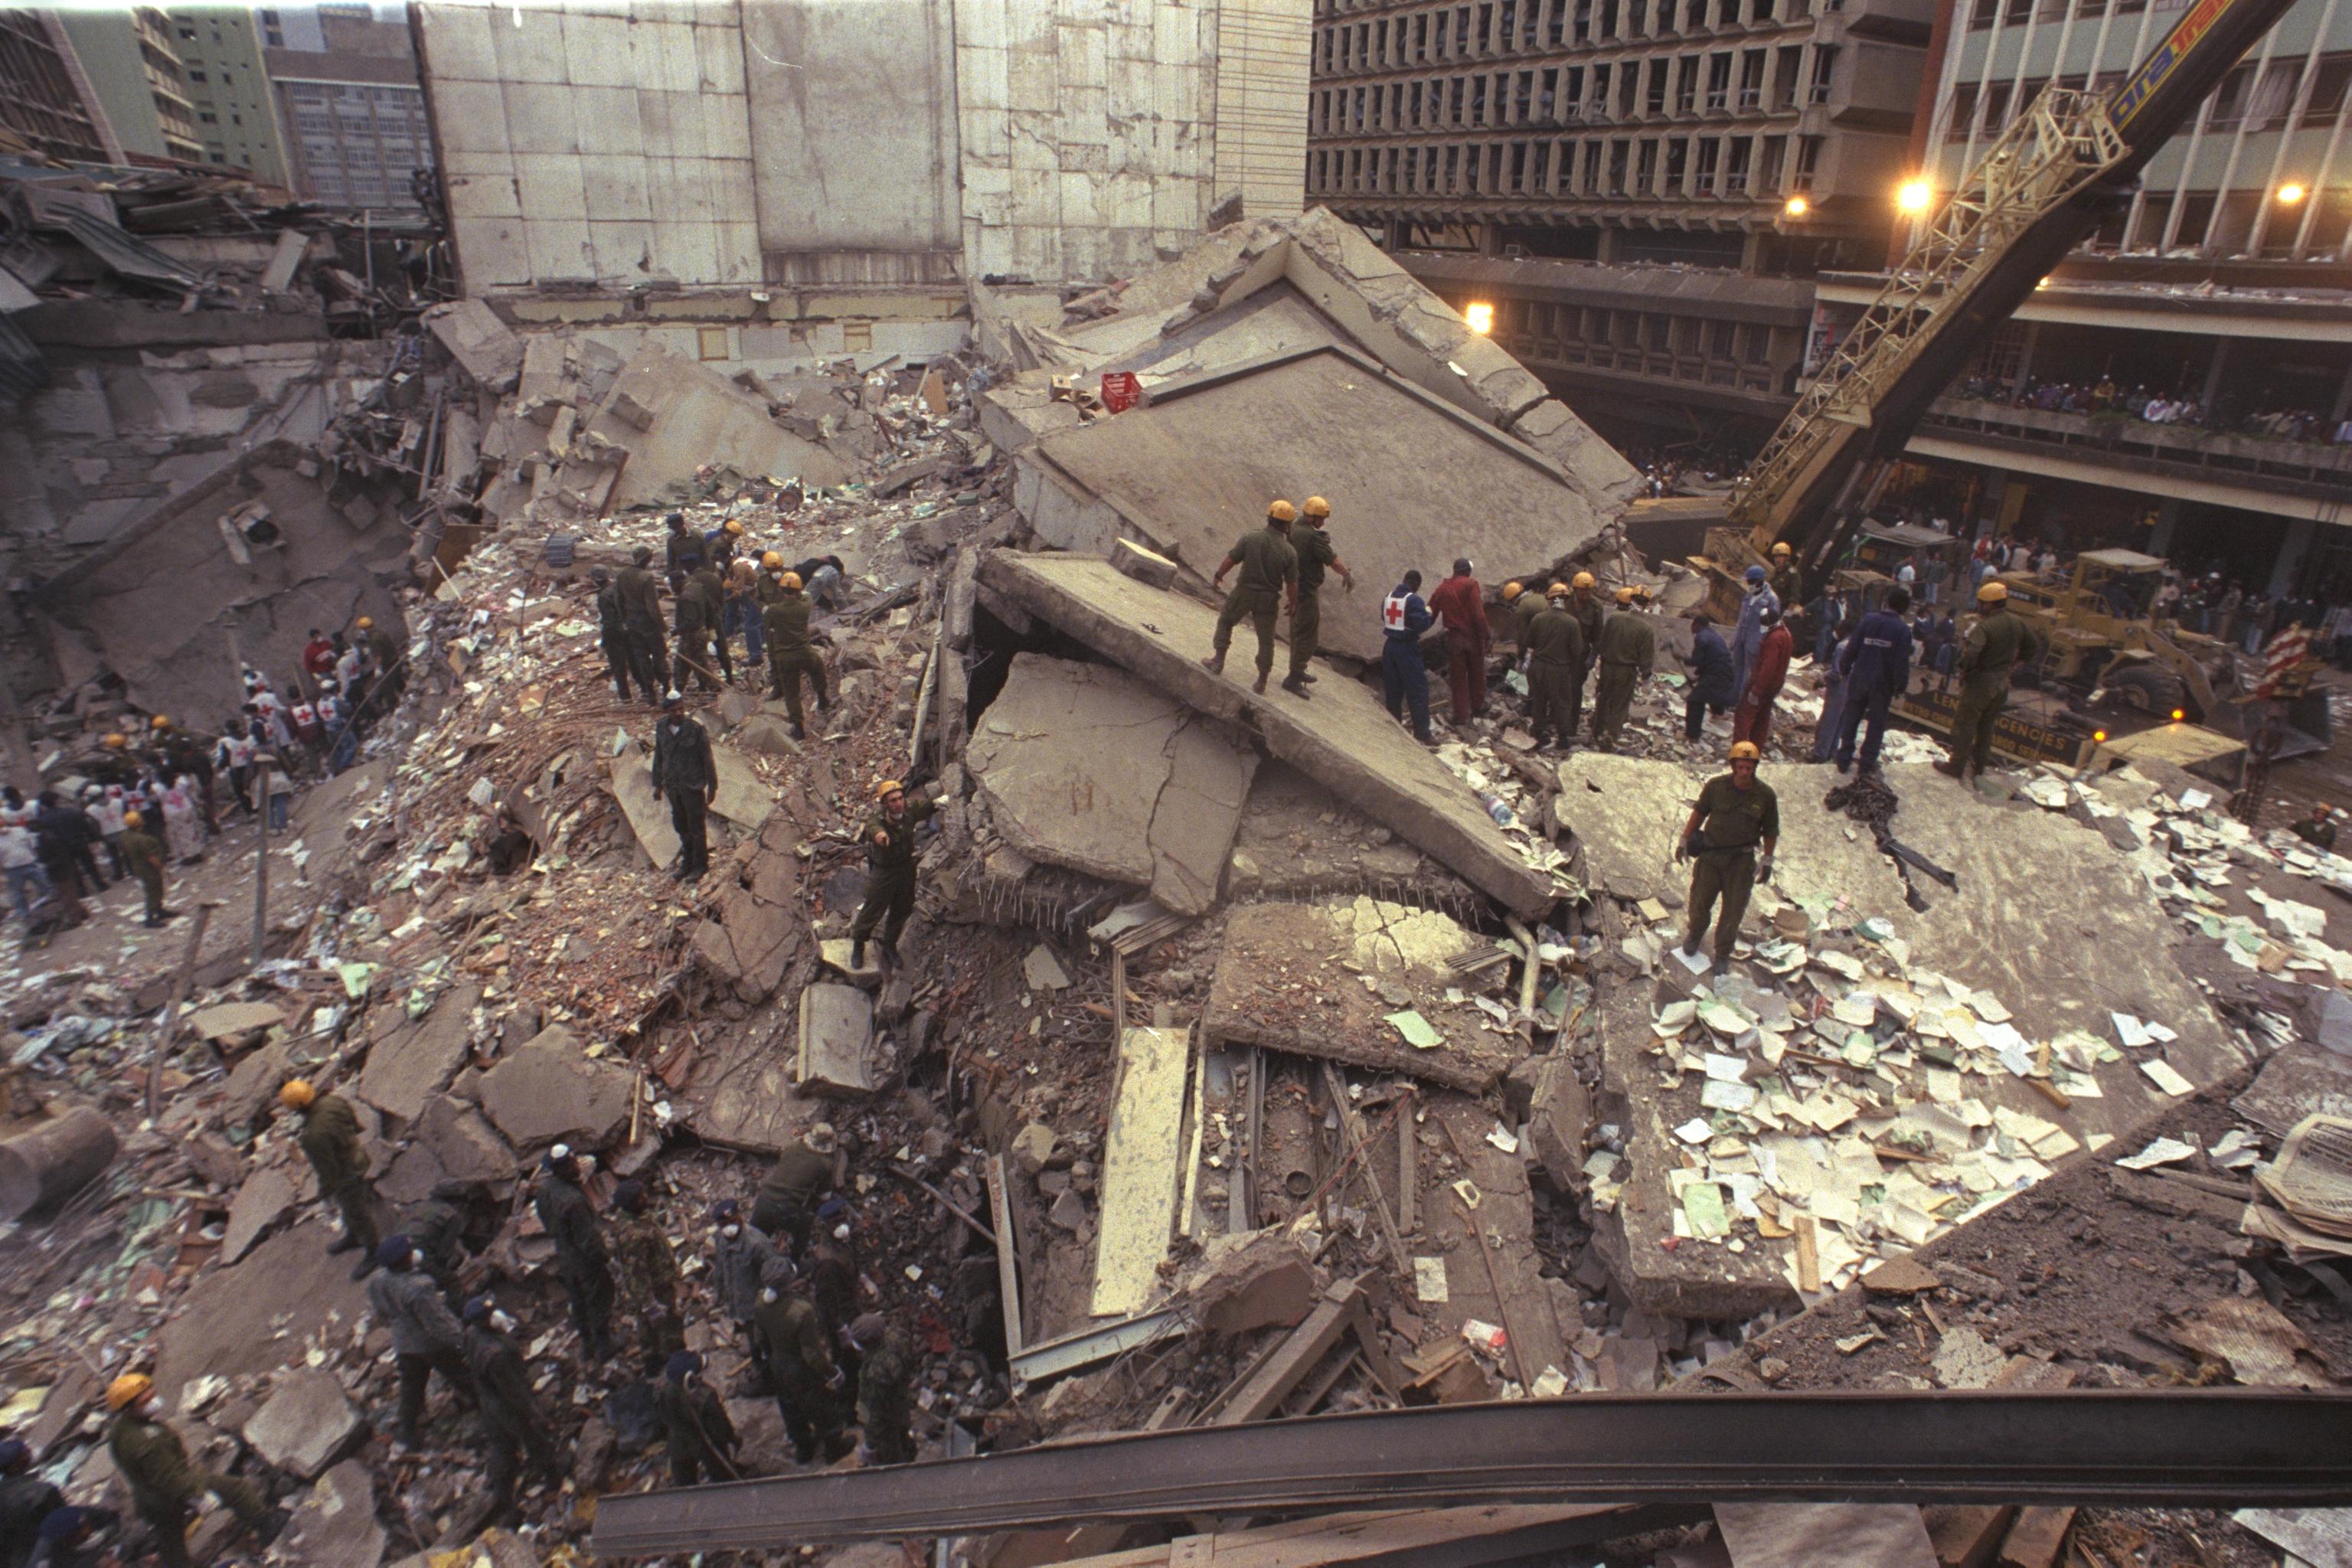 The aftermath of the United States embassy bombing in Nairobi, Kenya, 1998.